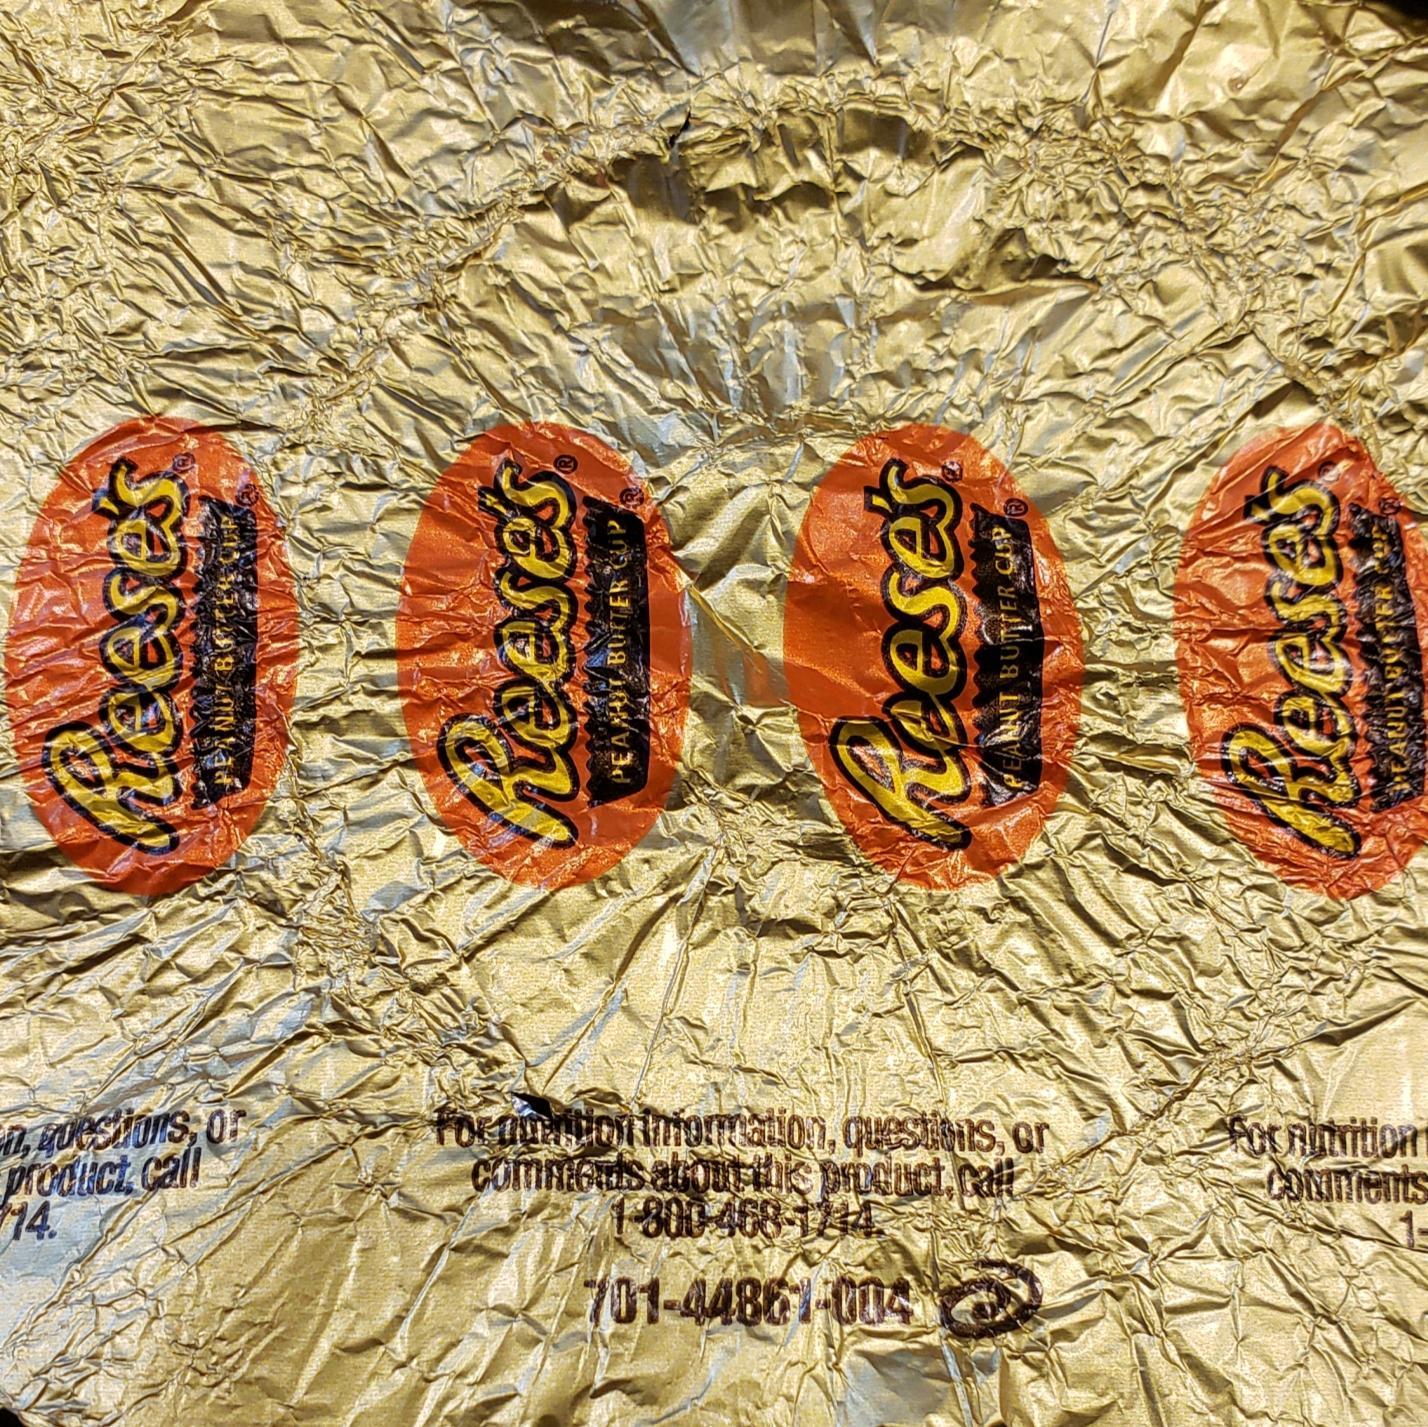 Yellow Swirl Logo - Yes, I know it's a Reese's wrapper. What does the number and swirl ...